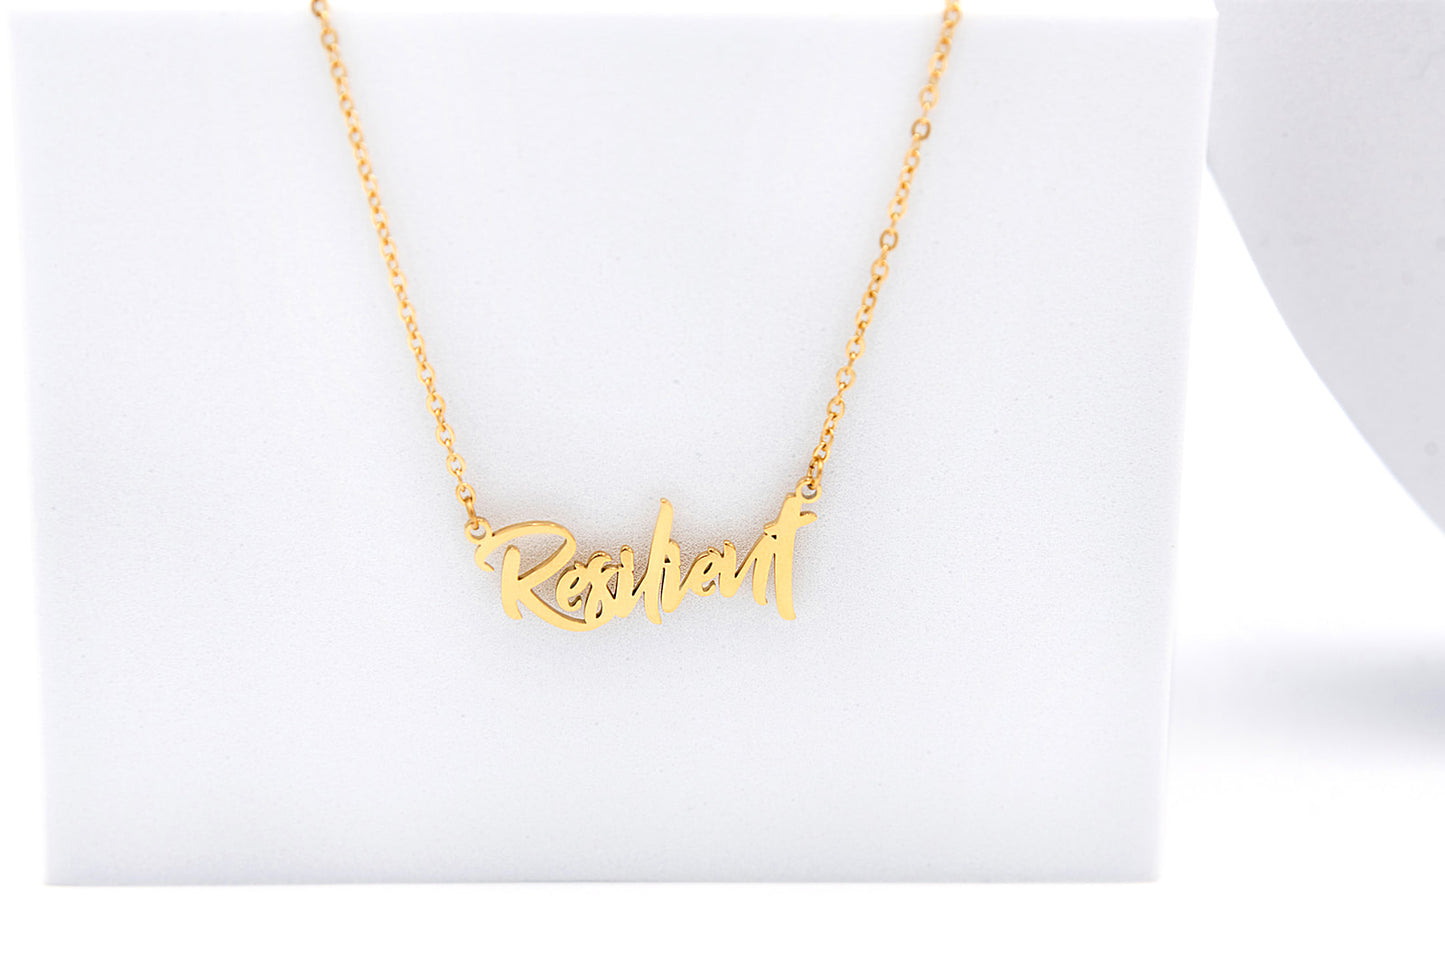 resilient affirmation necklace in color gold from Sol Rise Essentials